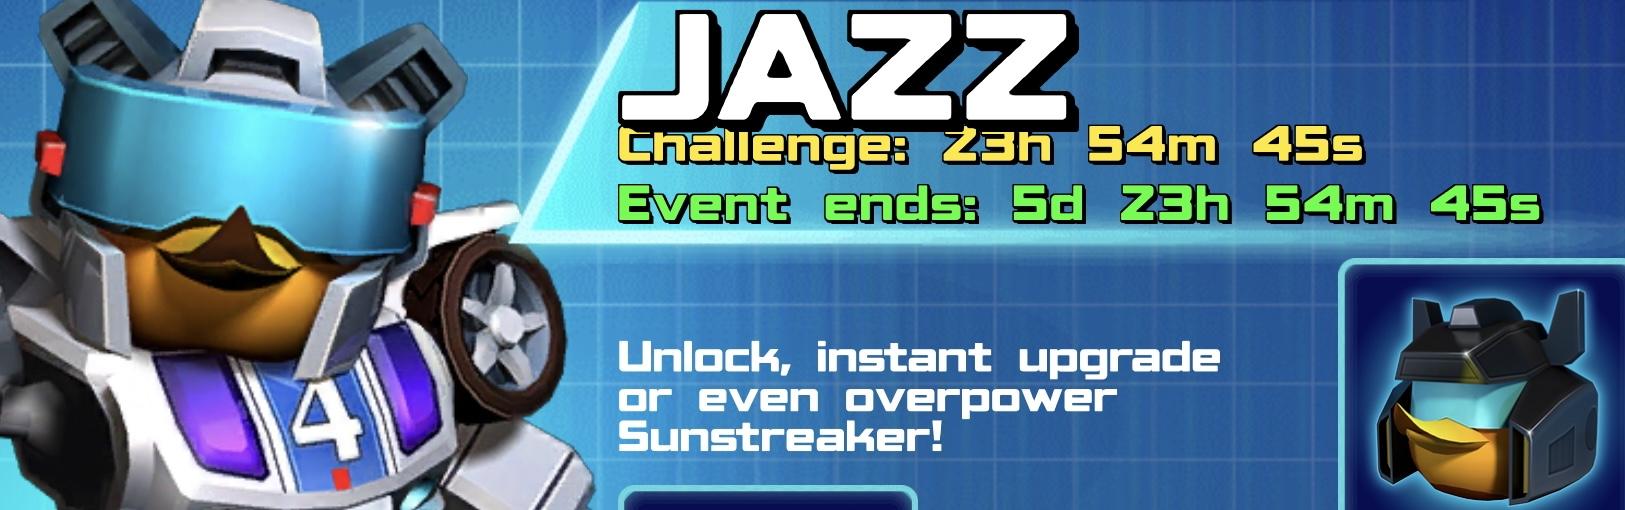 The event banner for Jazz